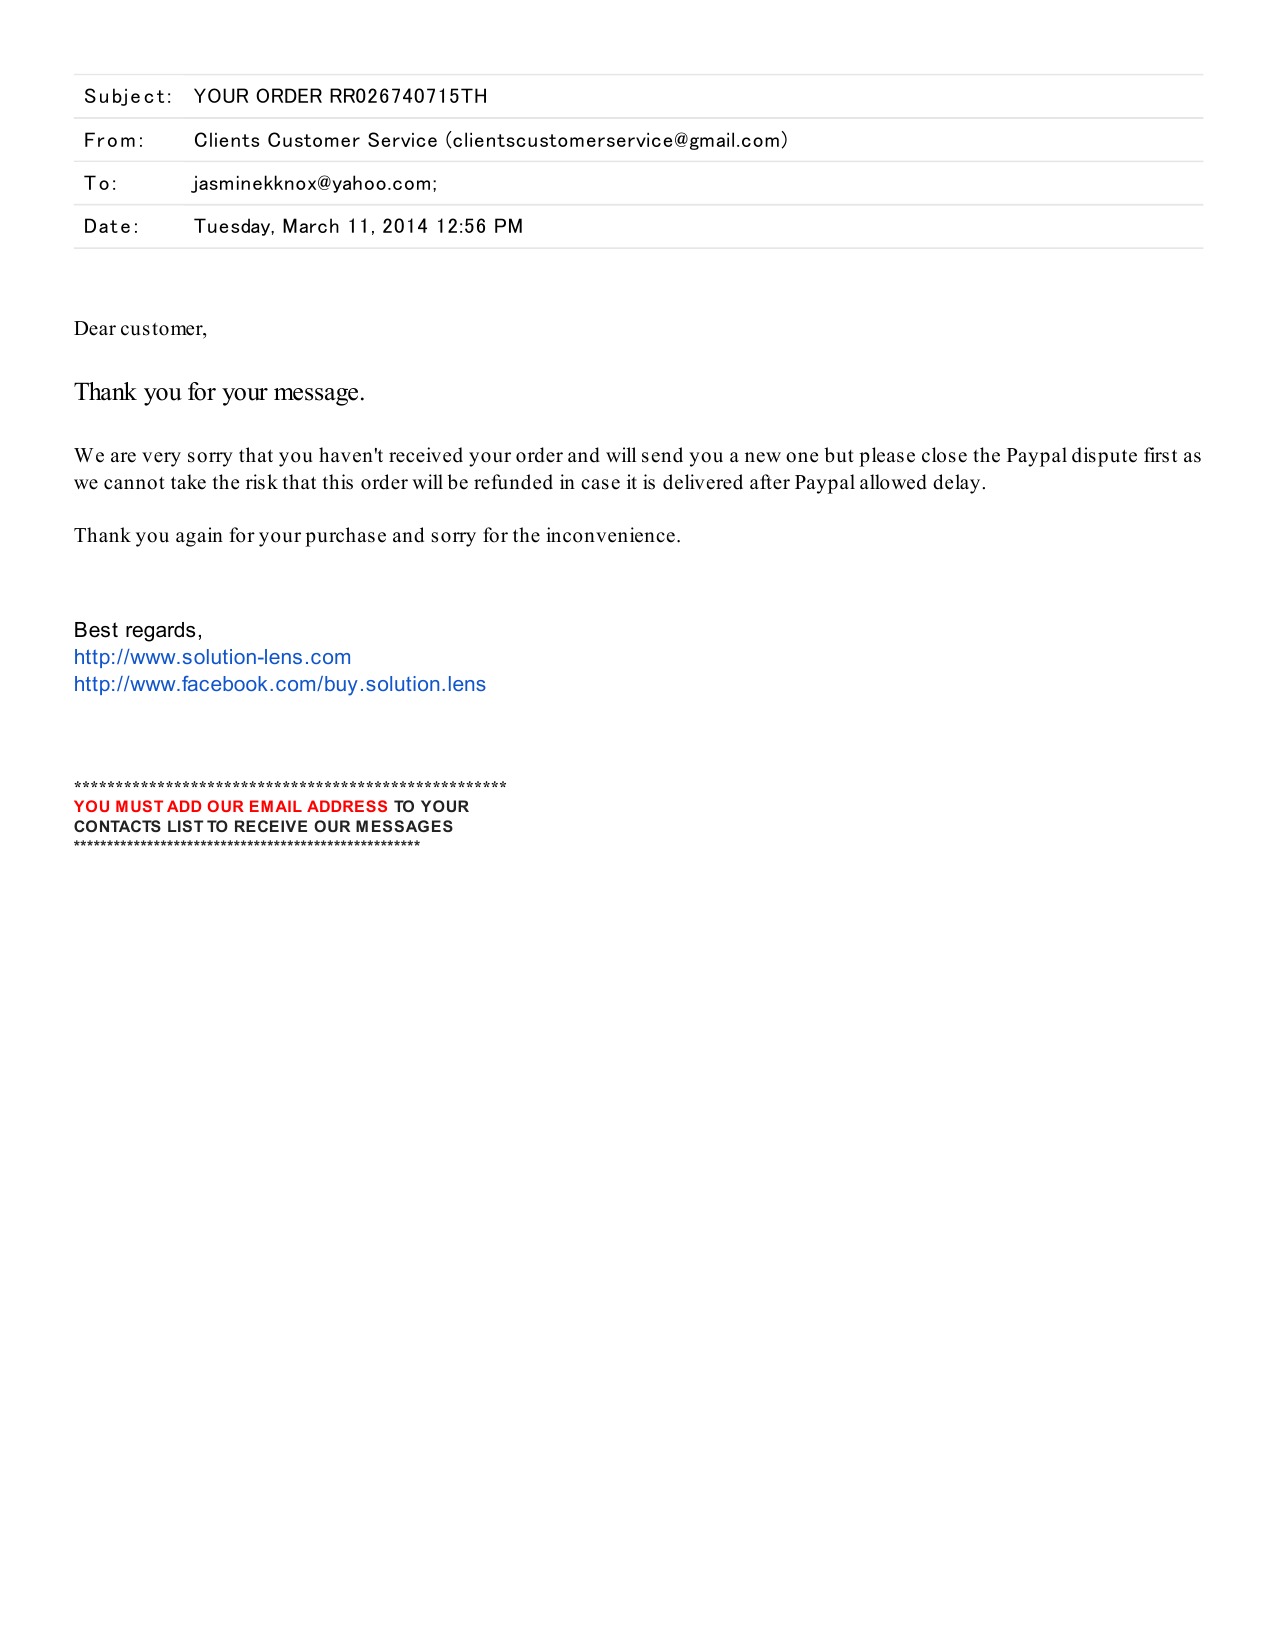 Original email from seller dated 3/11/13 admitting I did not receive my shipment